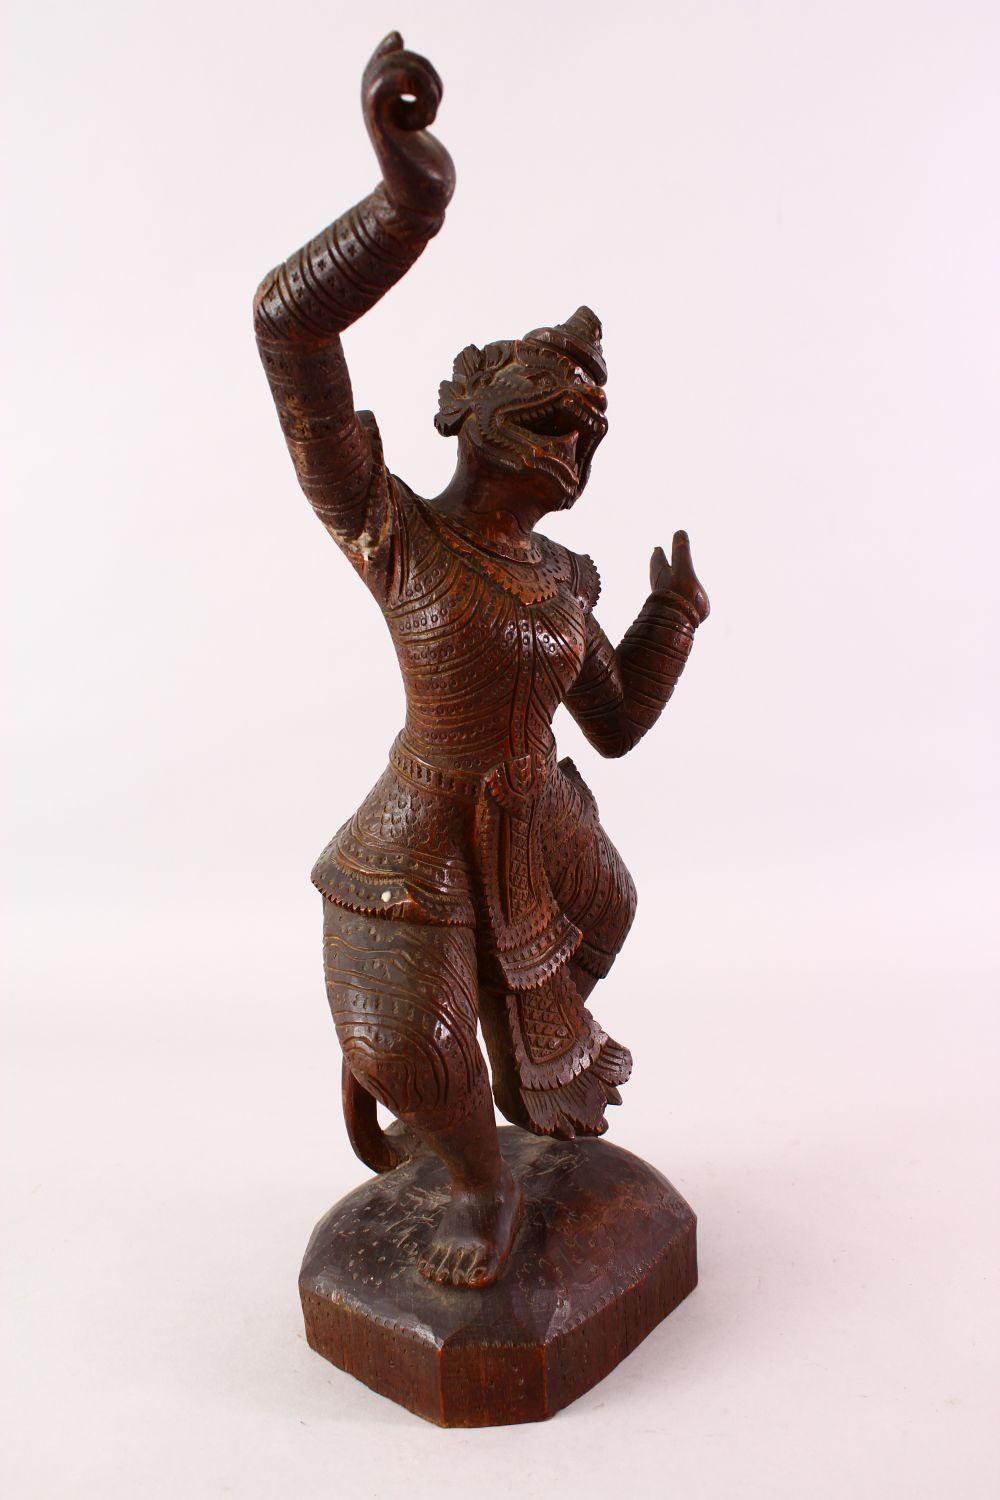 A GOOD 19TH CENTURY OR EARLIER BURMESE CARVED WOODEN FIGURE OF A DEITY, 48cm high. - Image 2 of 8